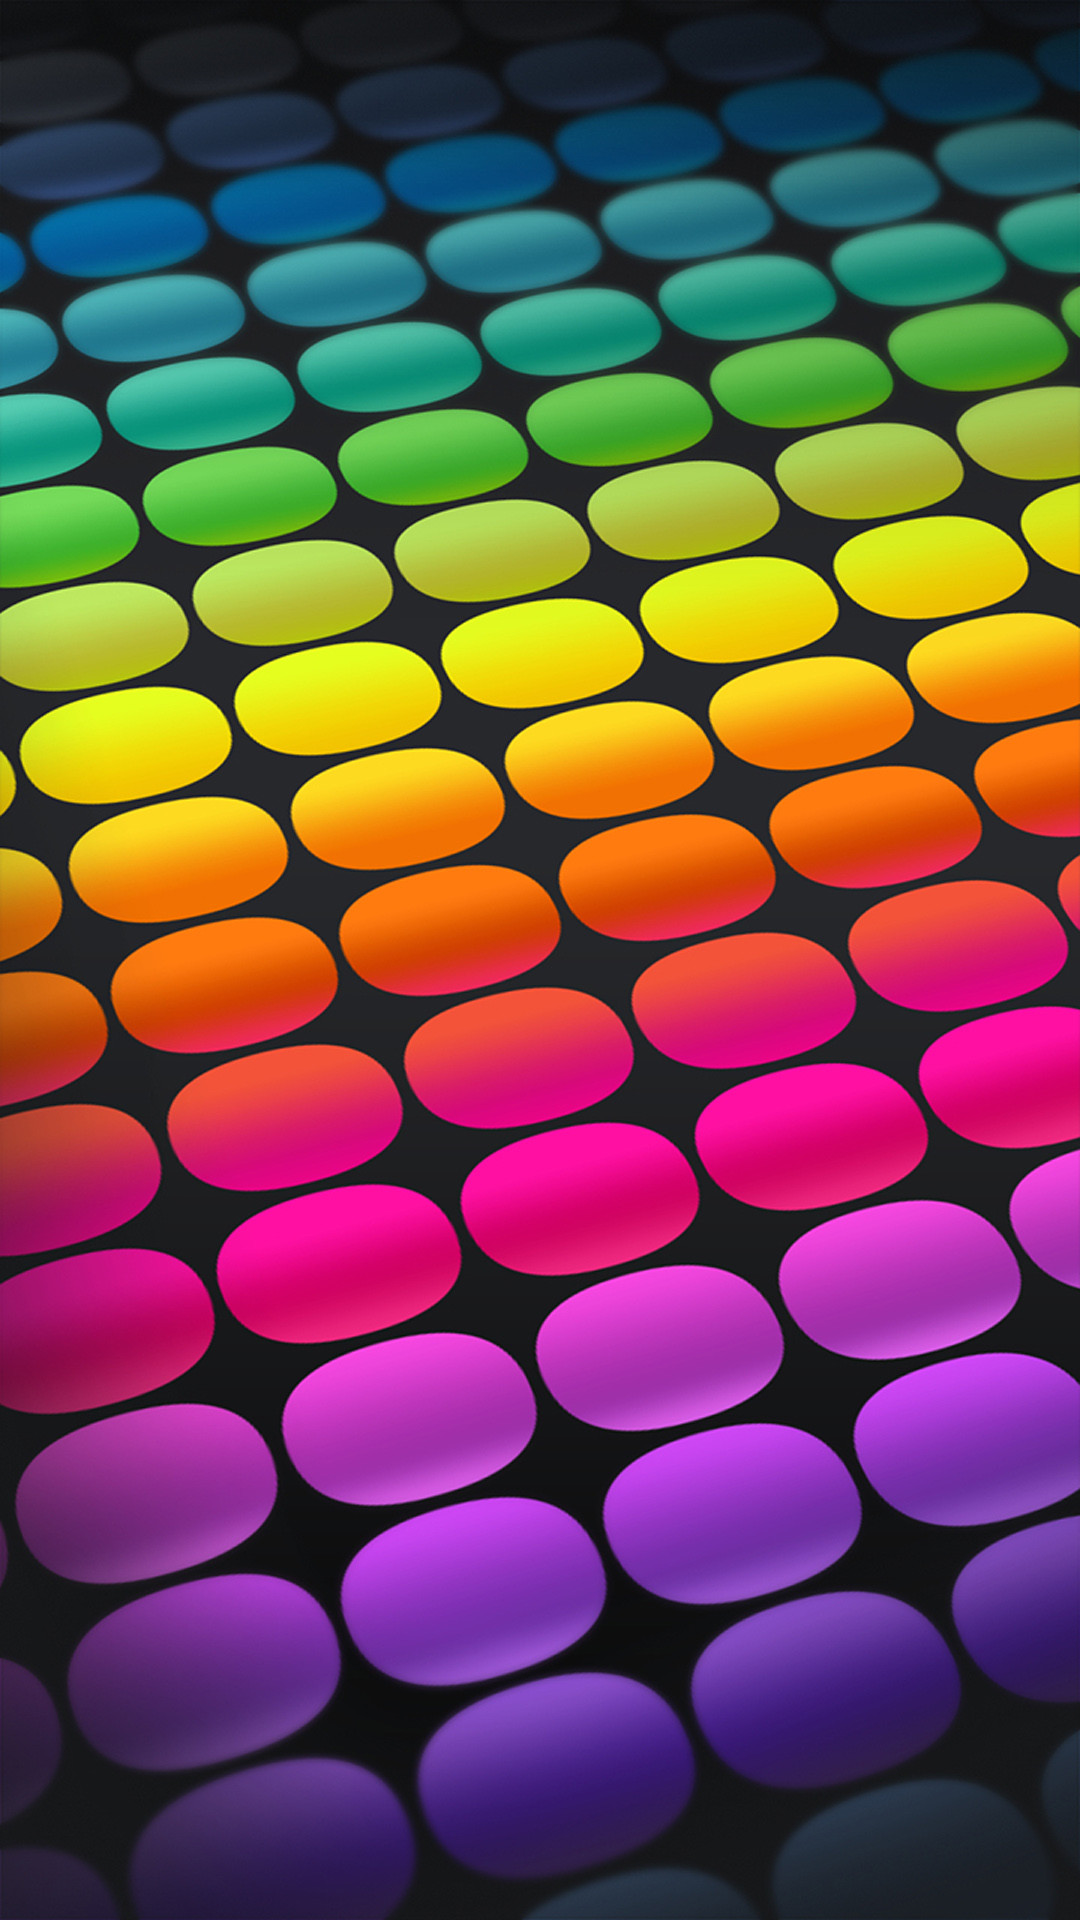 1080x1920 Colored dots iphone 6 plus wallpaper